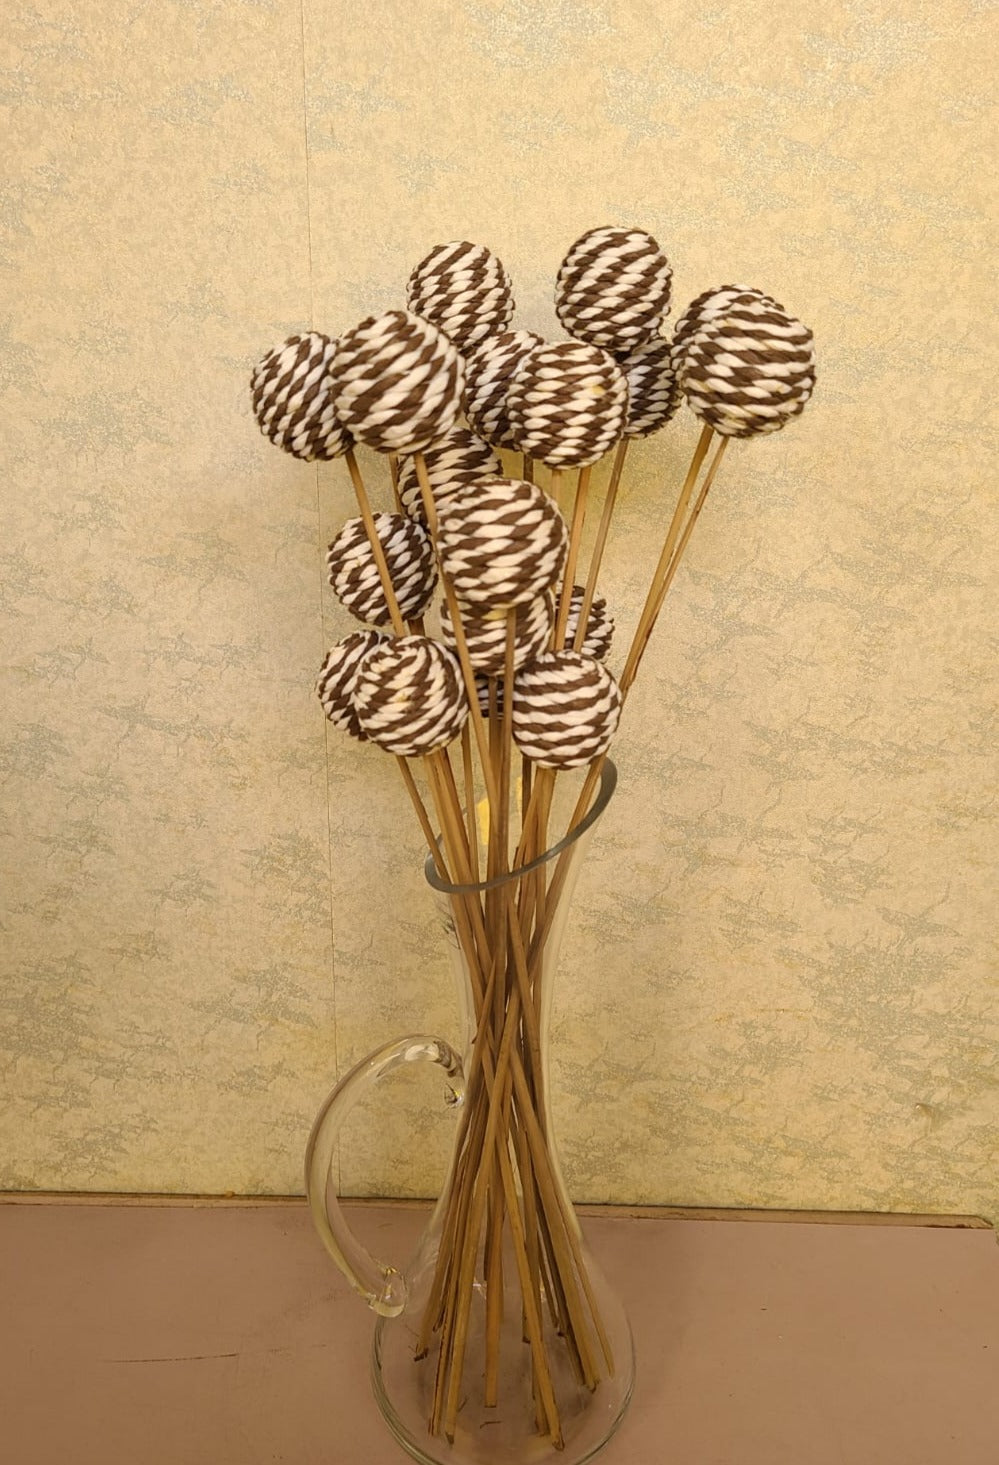 Natural black and white cane balls with stick